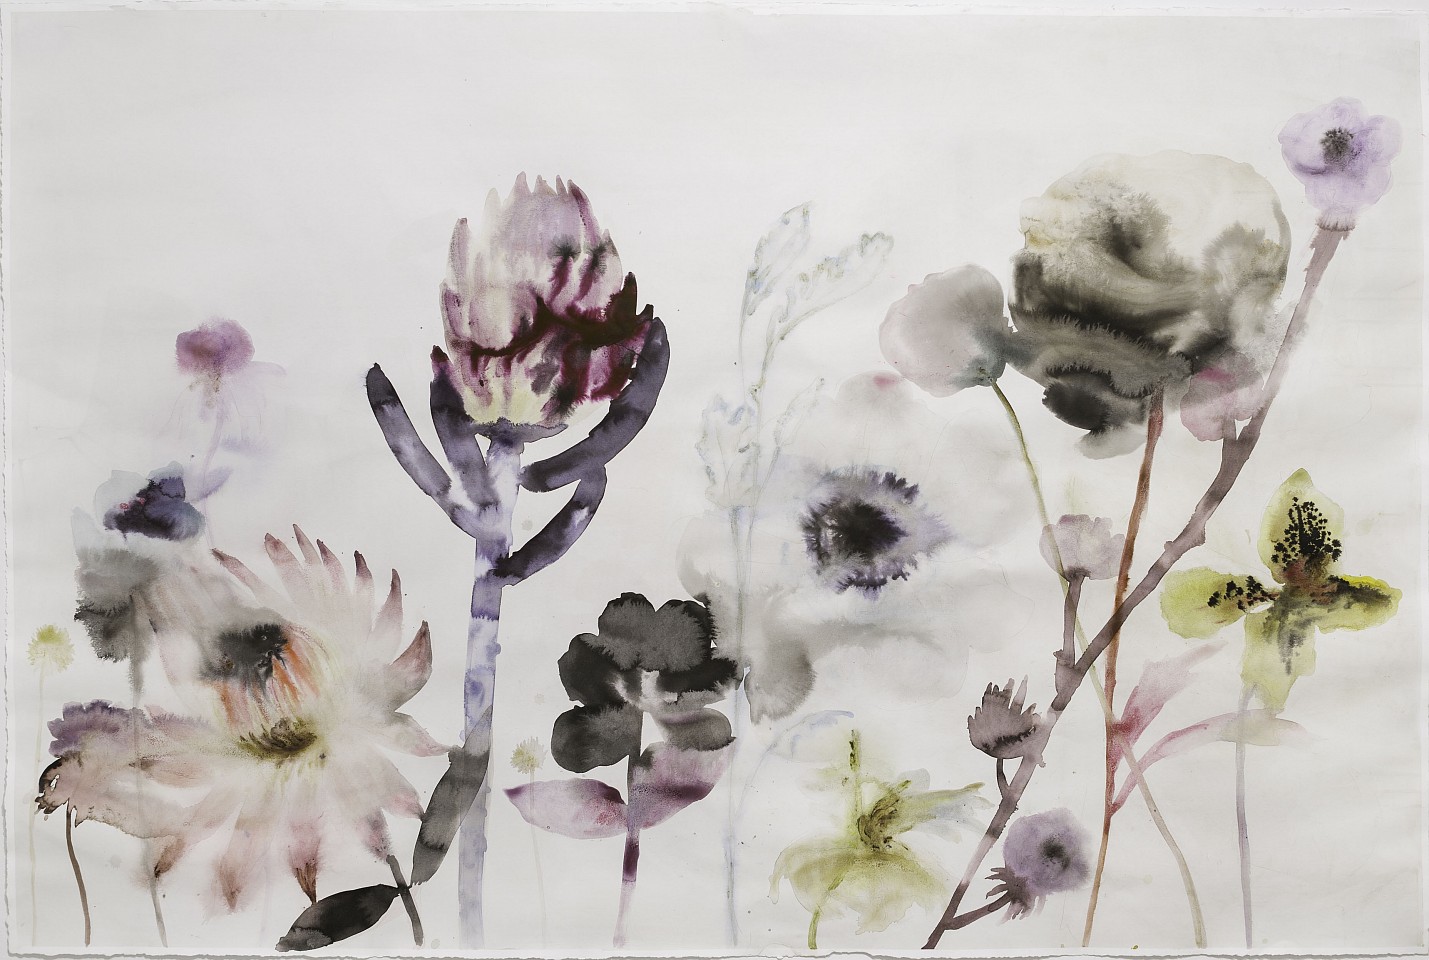 Lourdes Sanchez
Untitled, 2017
SANCH726
watercolor and mixed media on paper, 44 x 64 inches framed